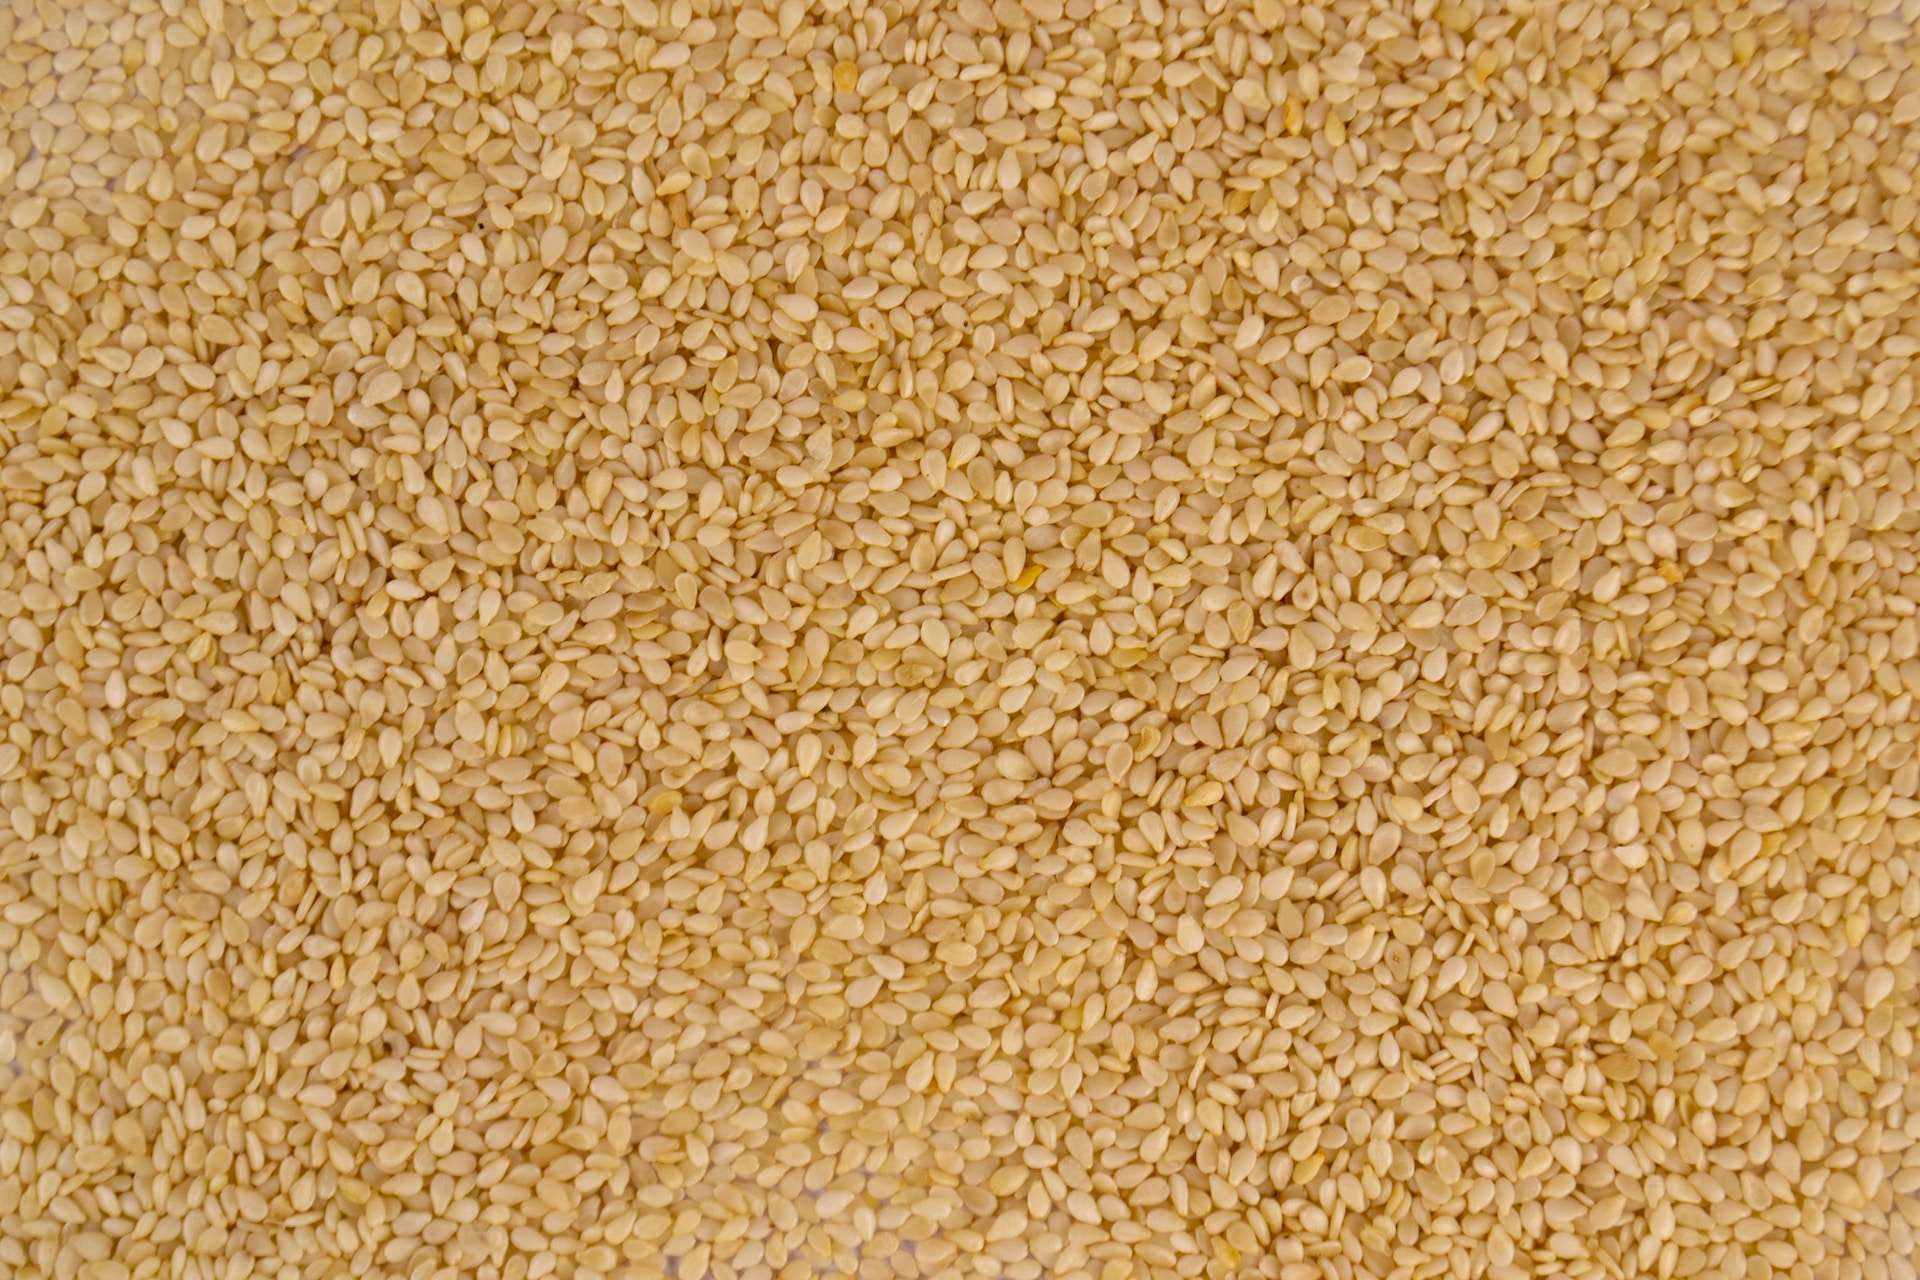 18 Facts About Sesame Seed - Facts.net